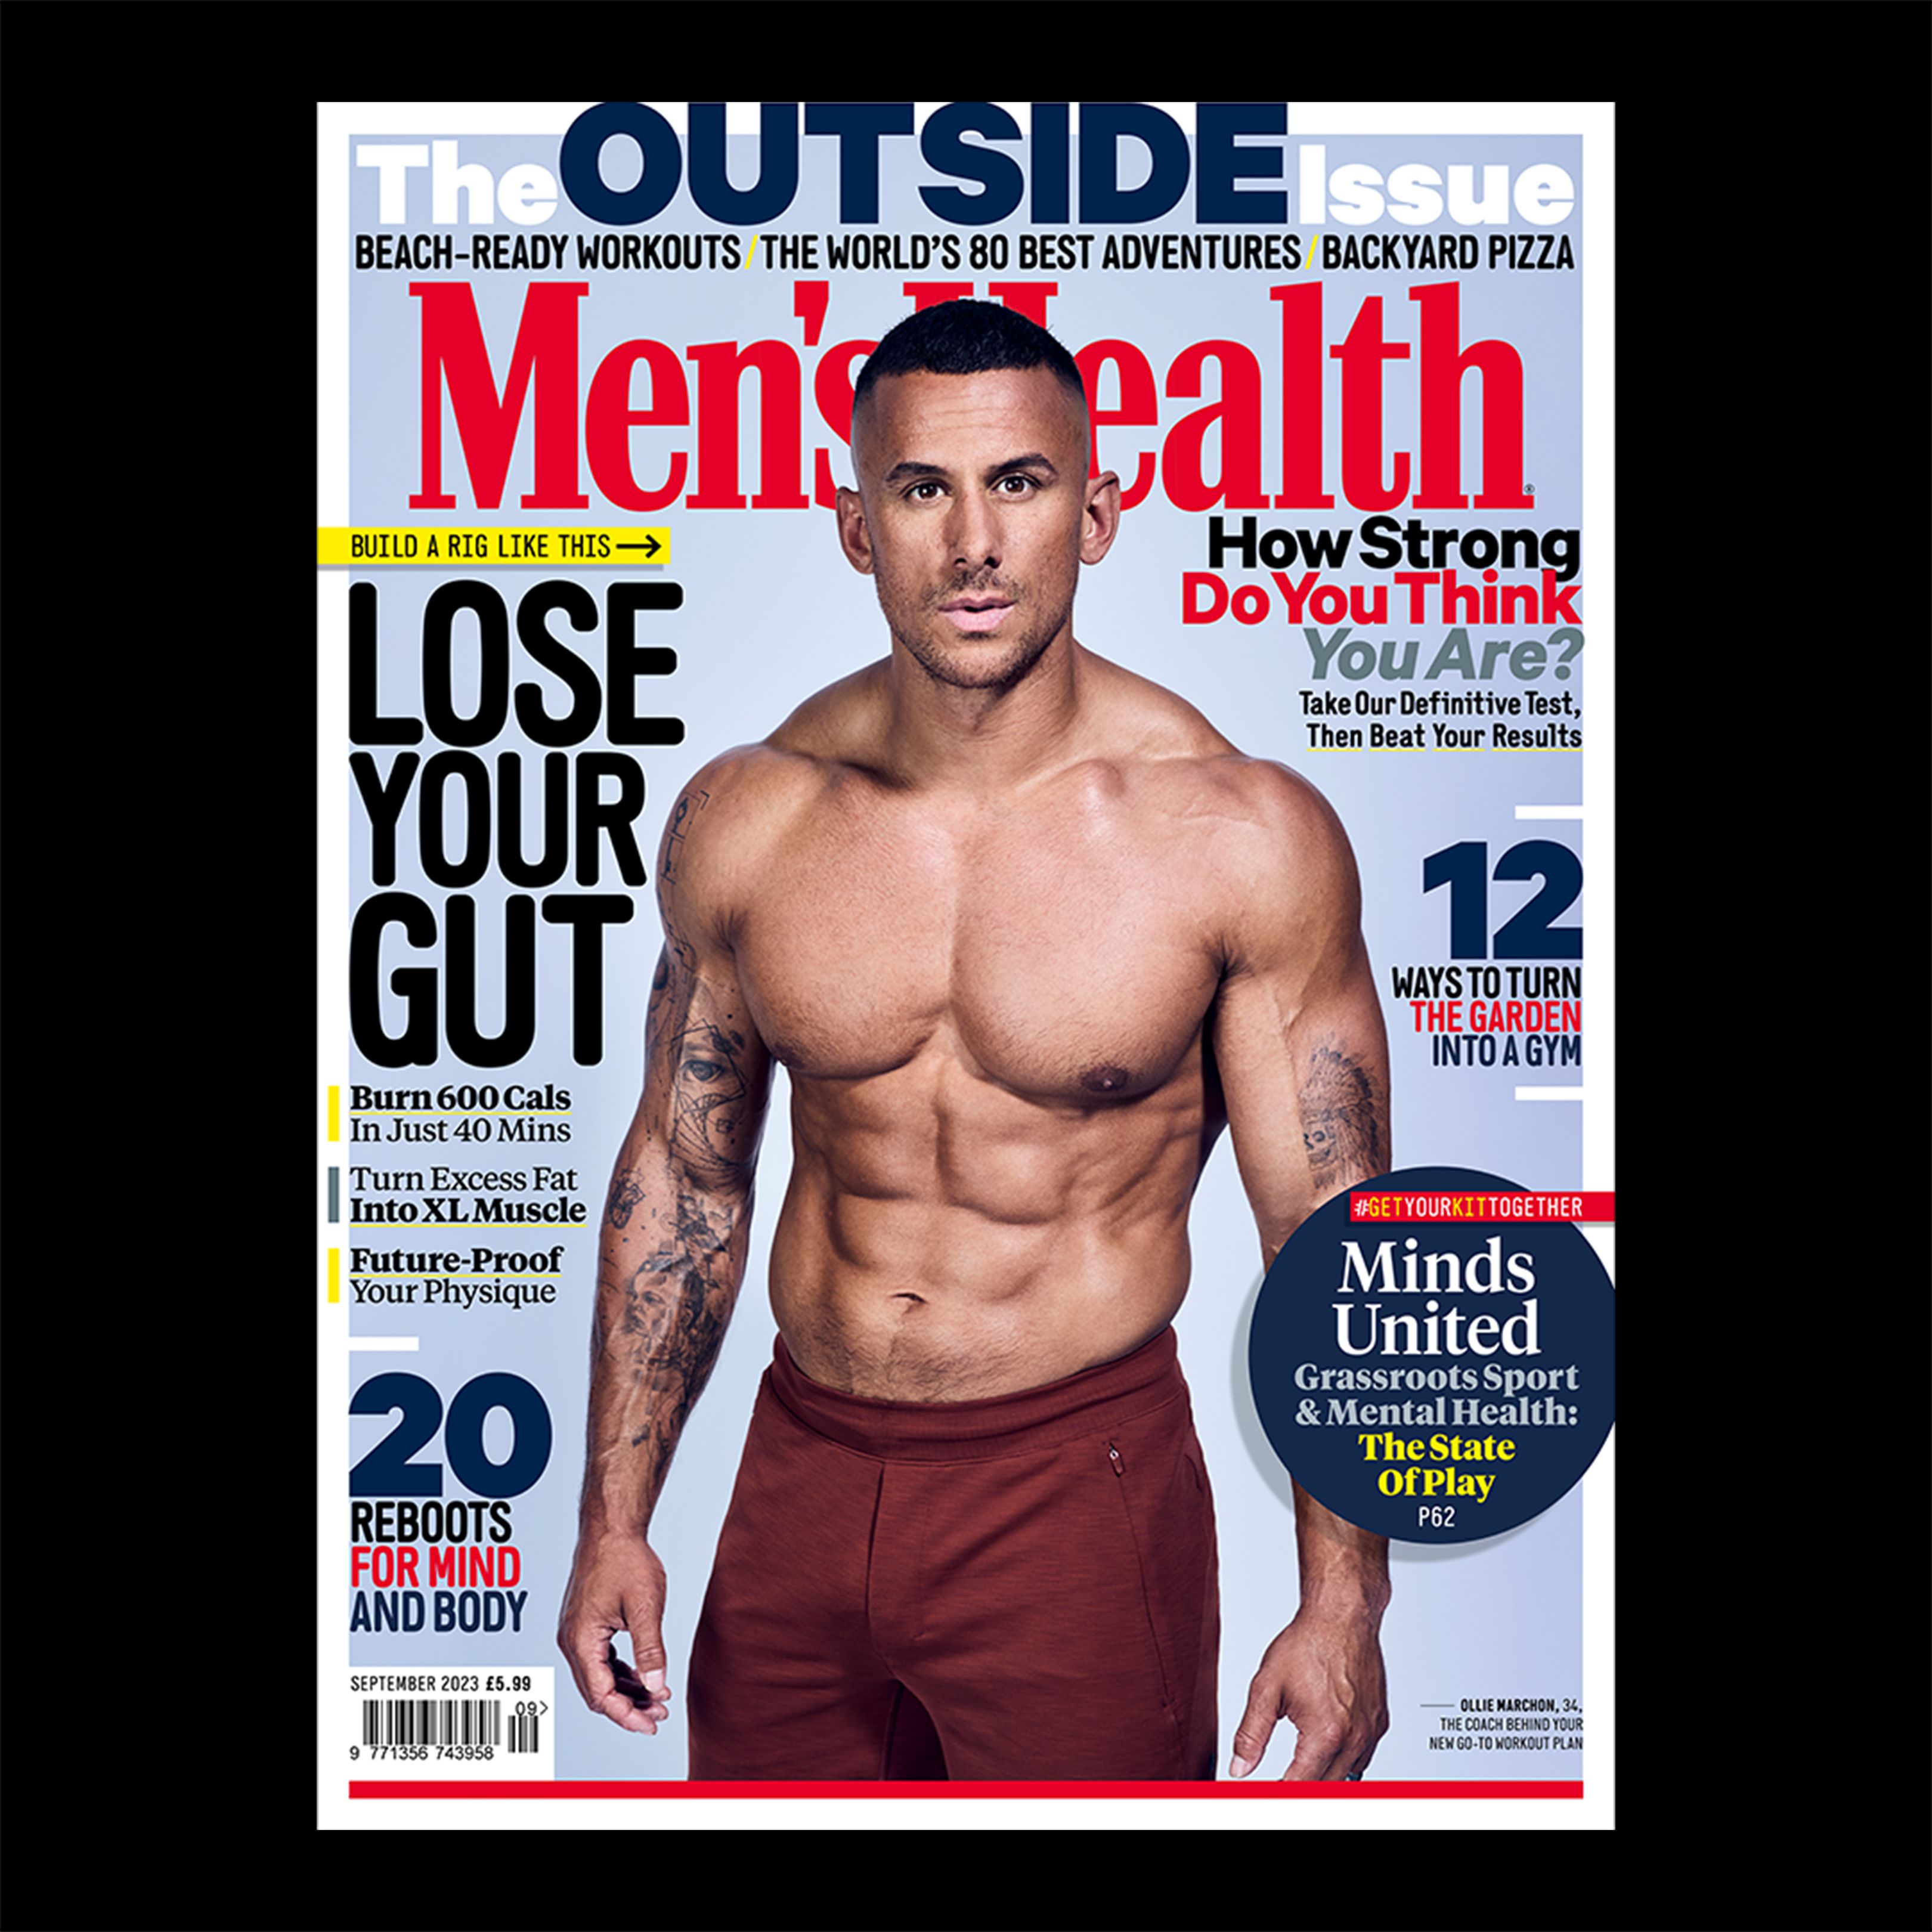 6 Great Reasons To Buy the September Issue of Mens Health pic